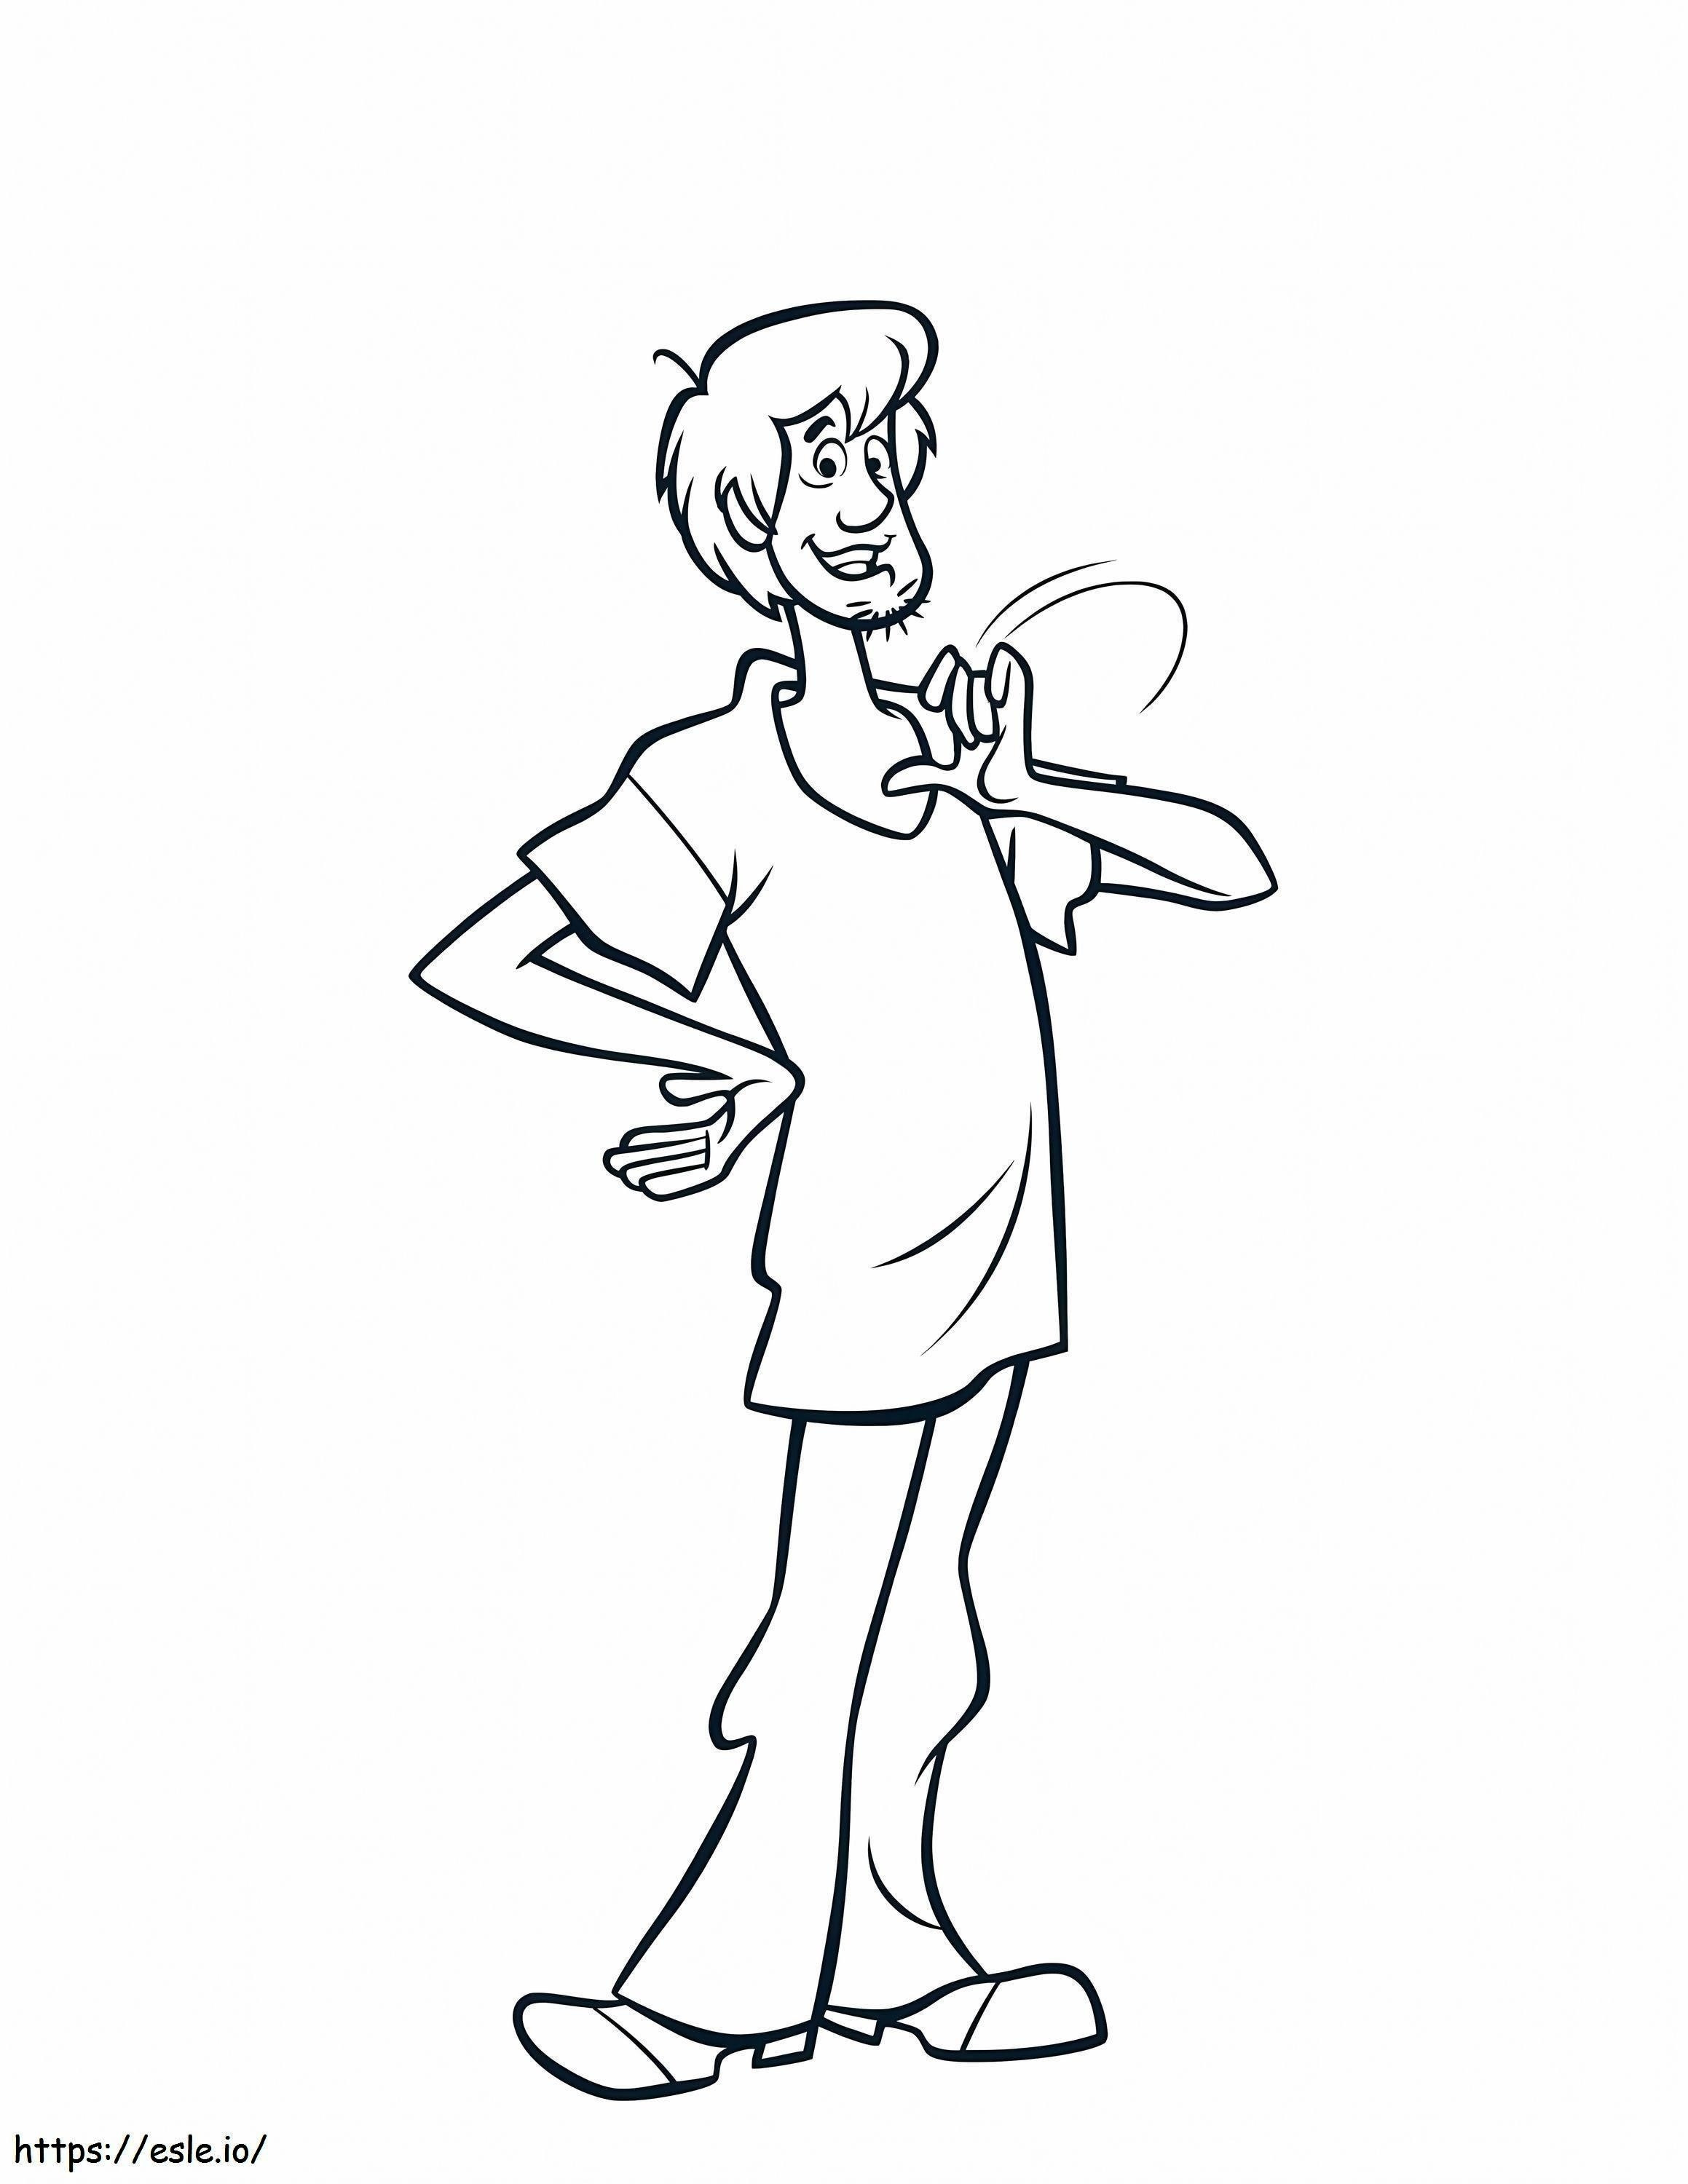 Shaggy Fun coloring page